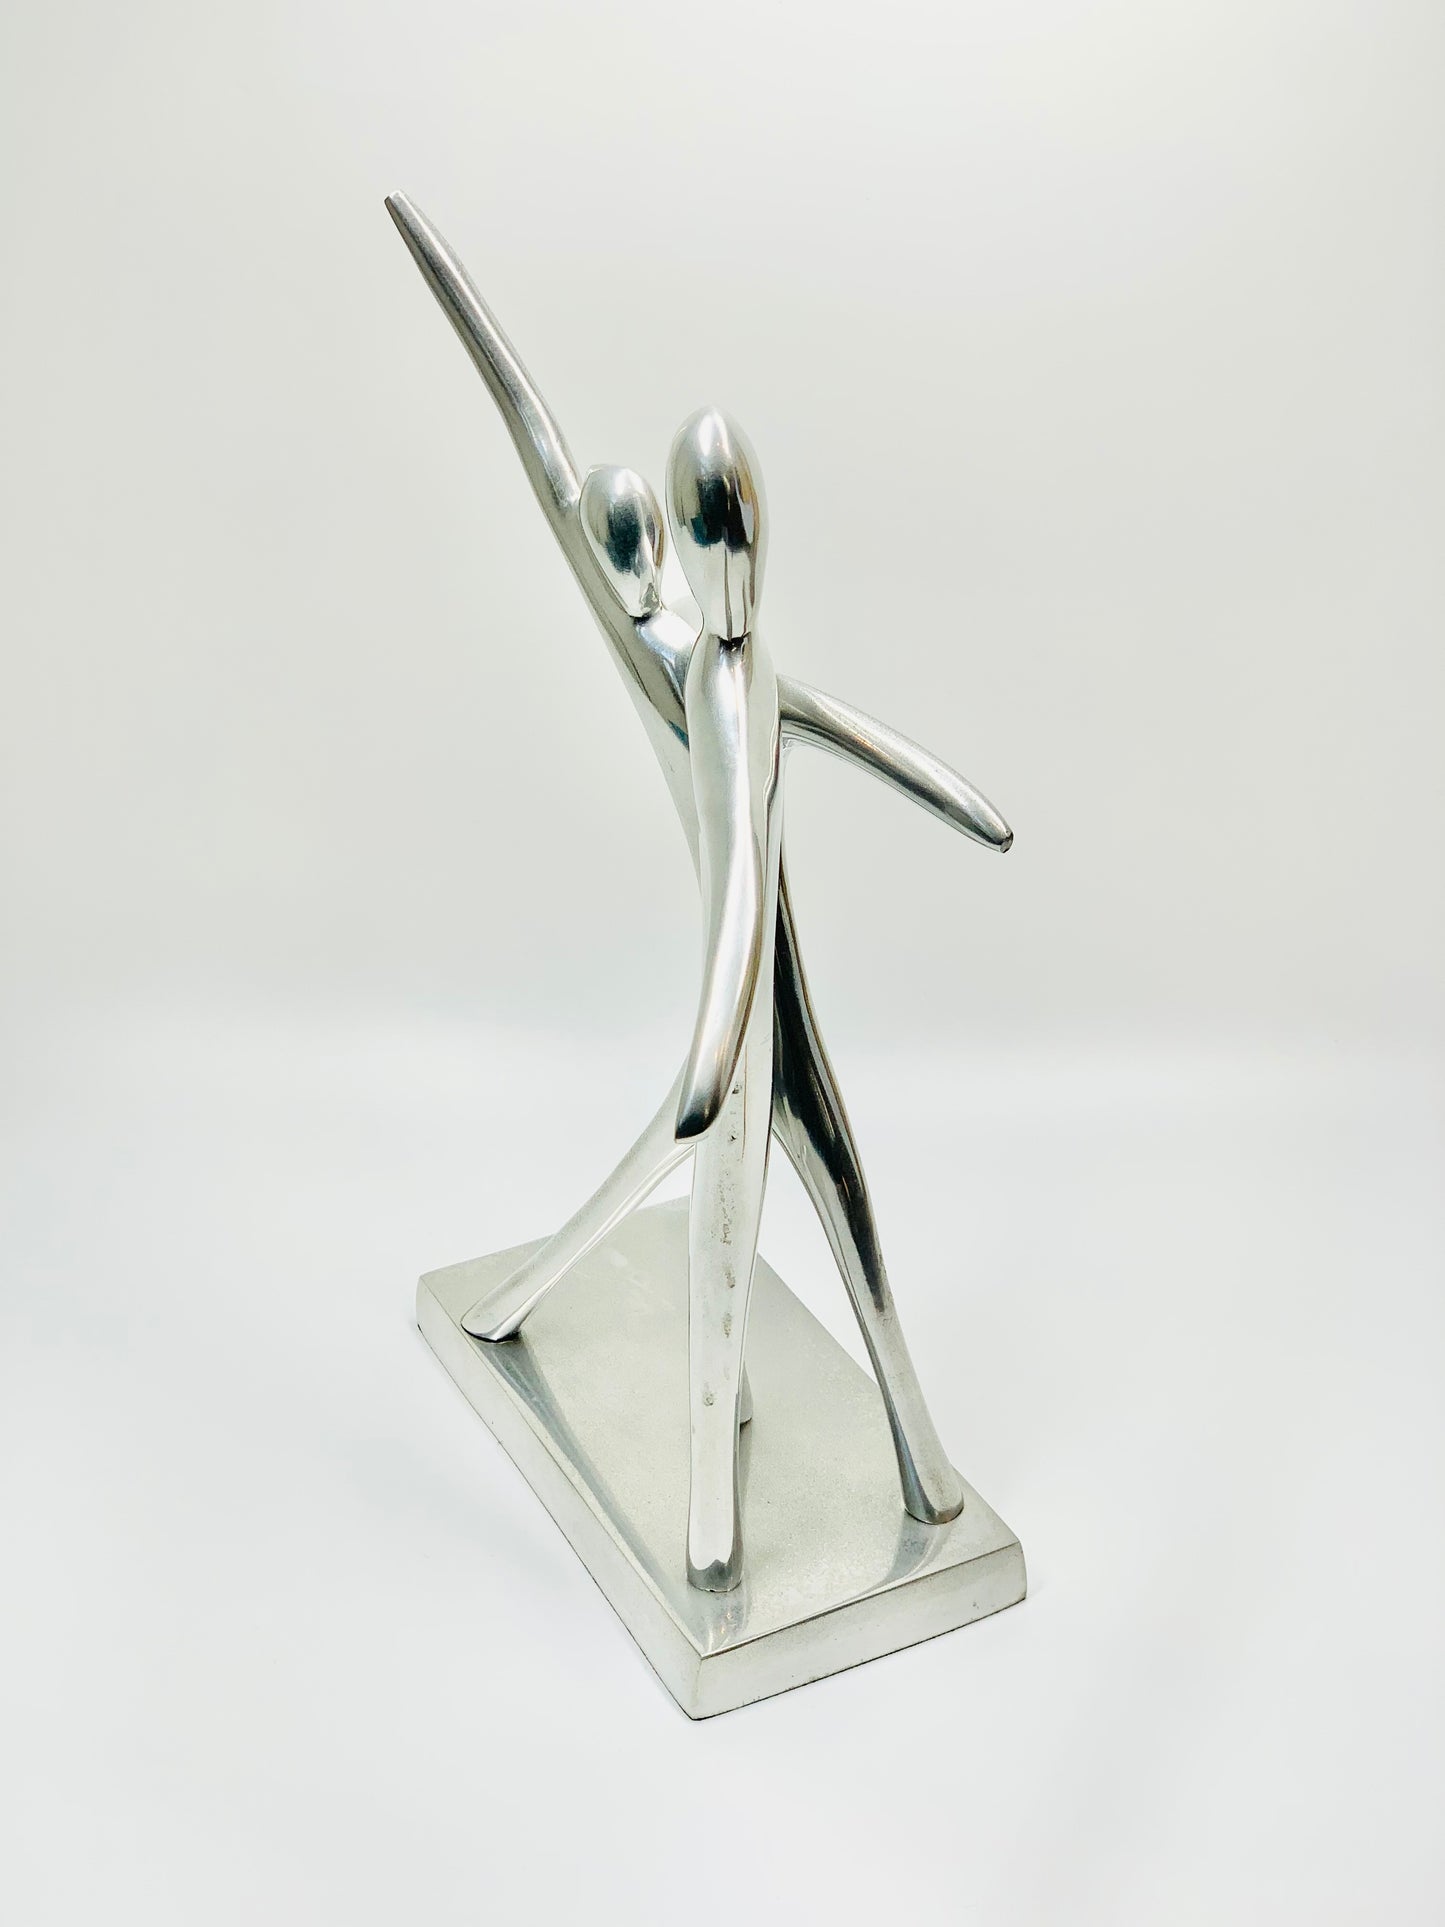 MCM stainless steel abstract dancing couple sculpture on matching stand